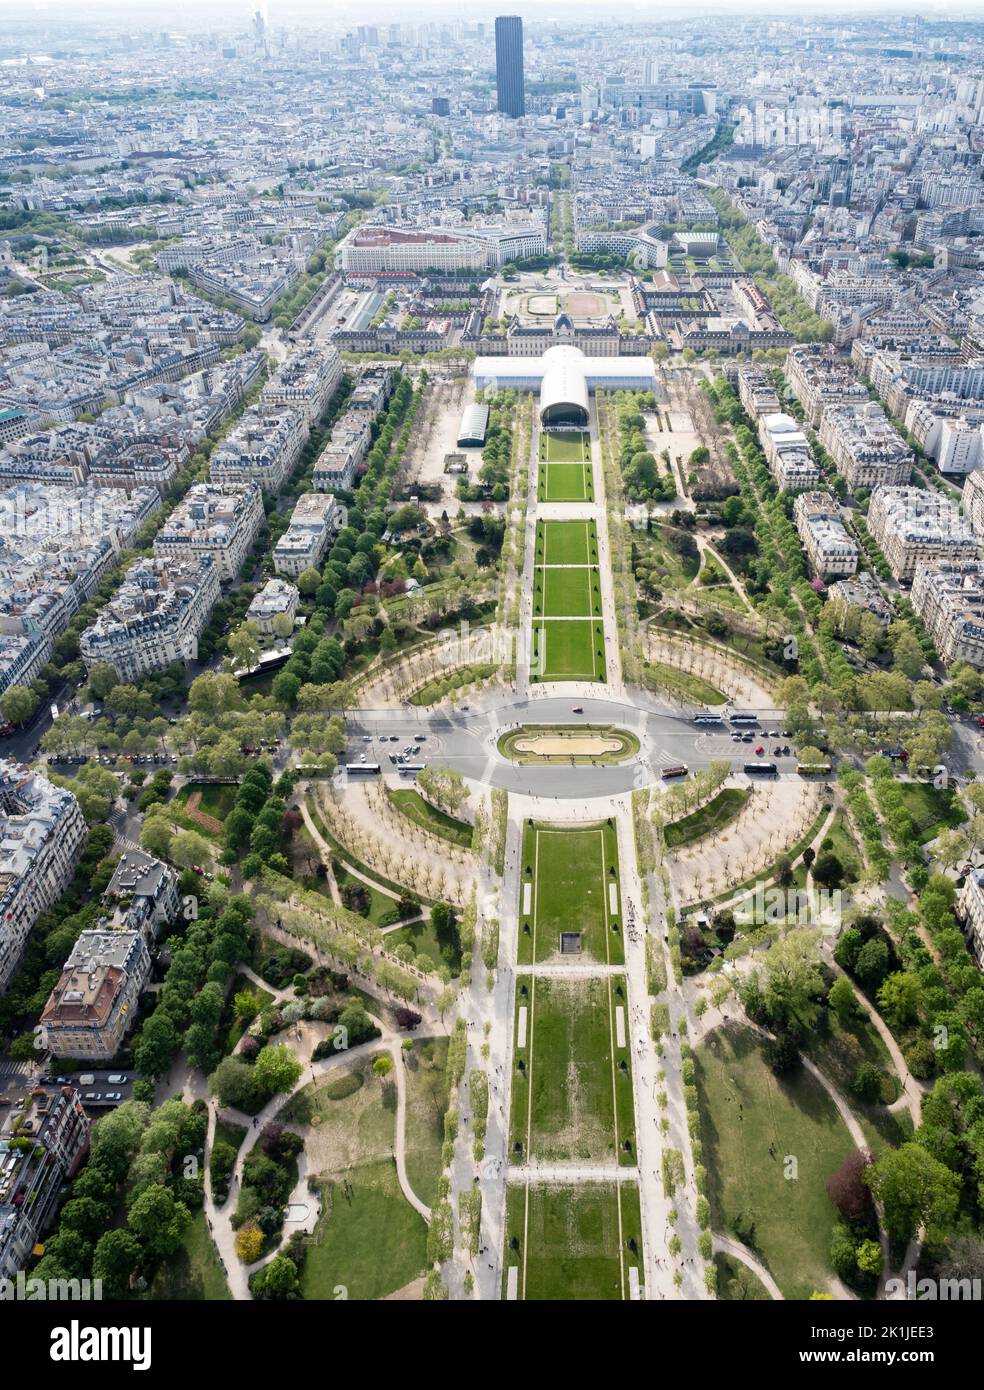 Paris, France - 18 April 2022: View from above to Champ de Mars, looking from Eiffel Tower towards southeast direction with the École Militaire and To Stock Photo